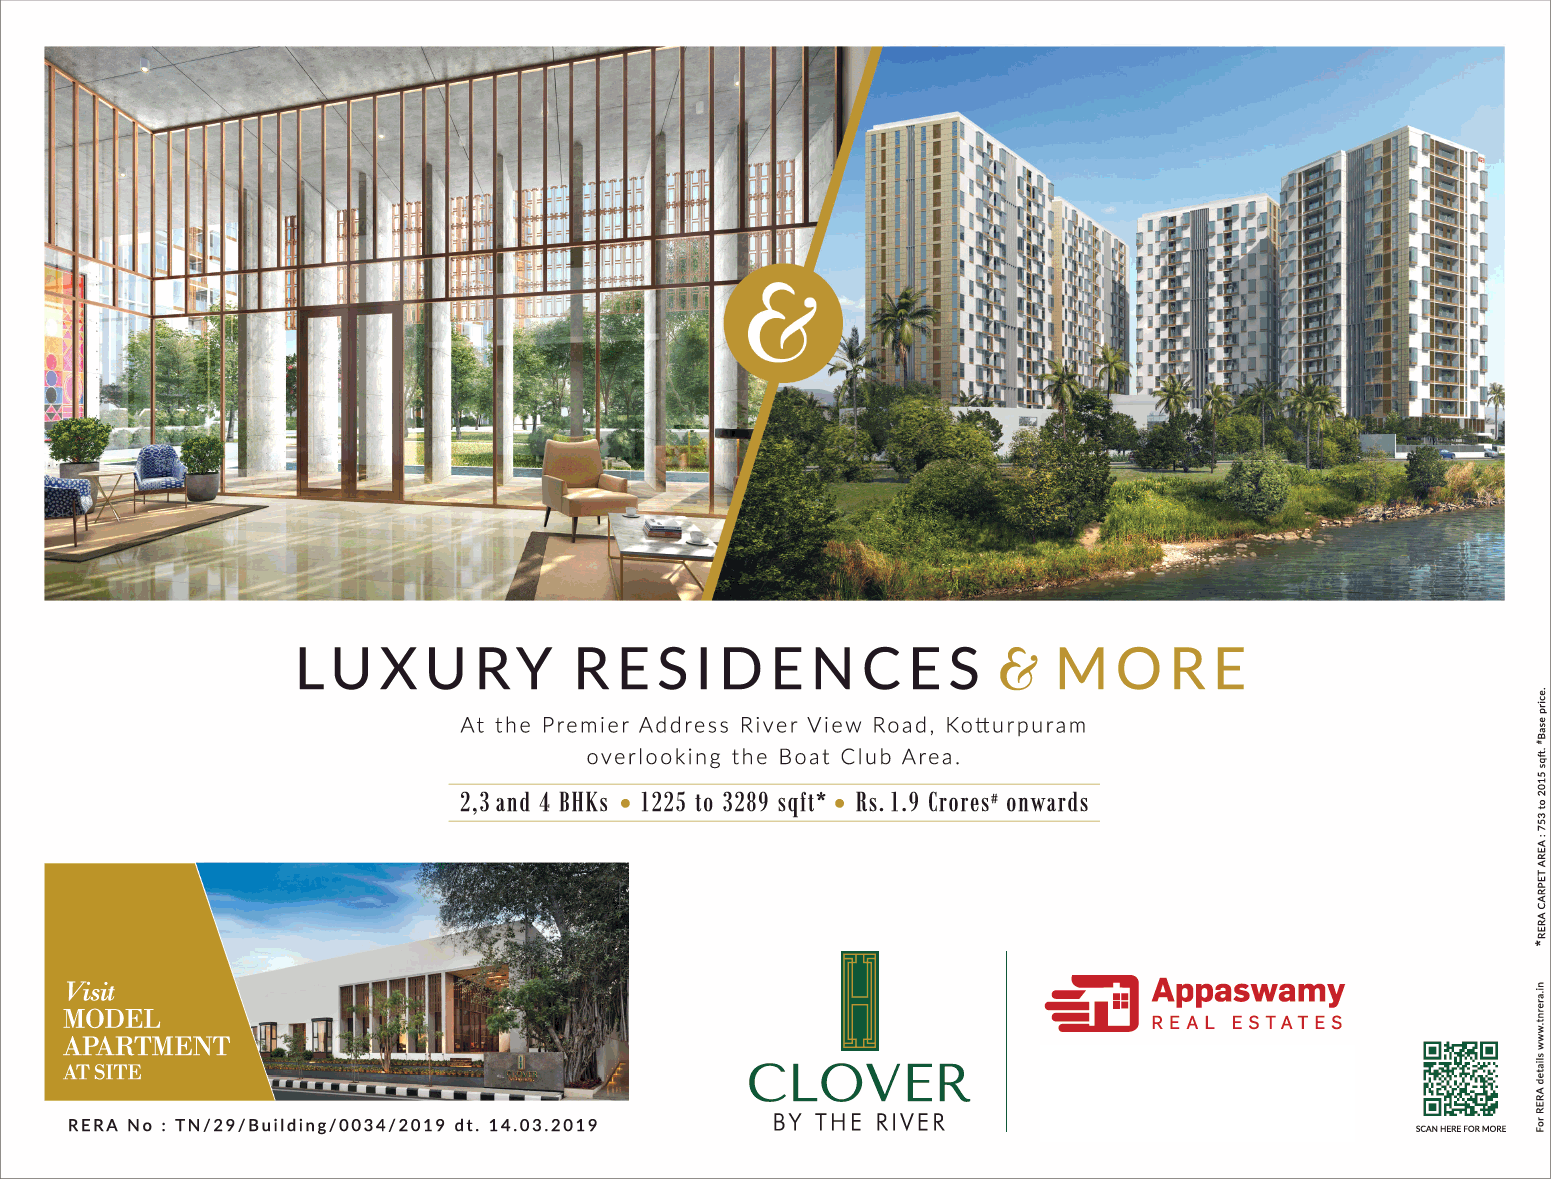 Book luxury residences & more at Appaswamy Clover By The River in Chennai